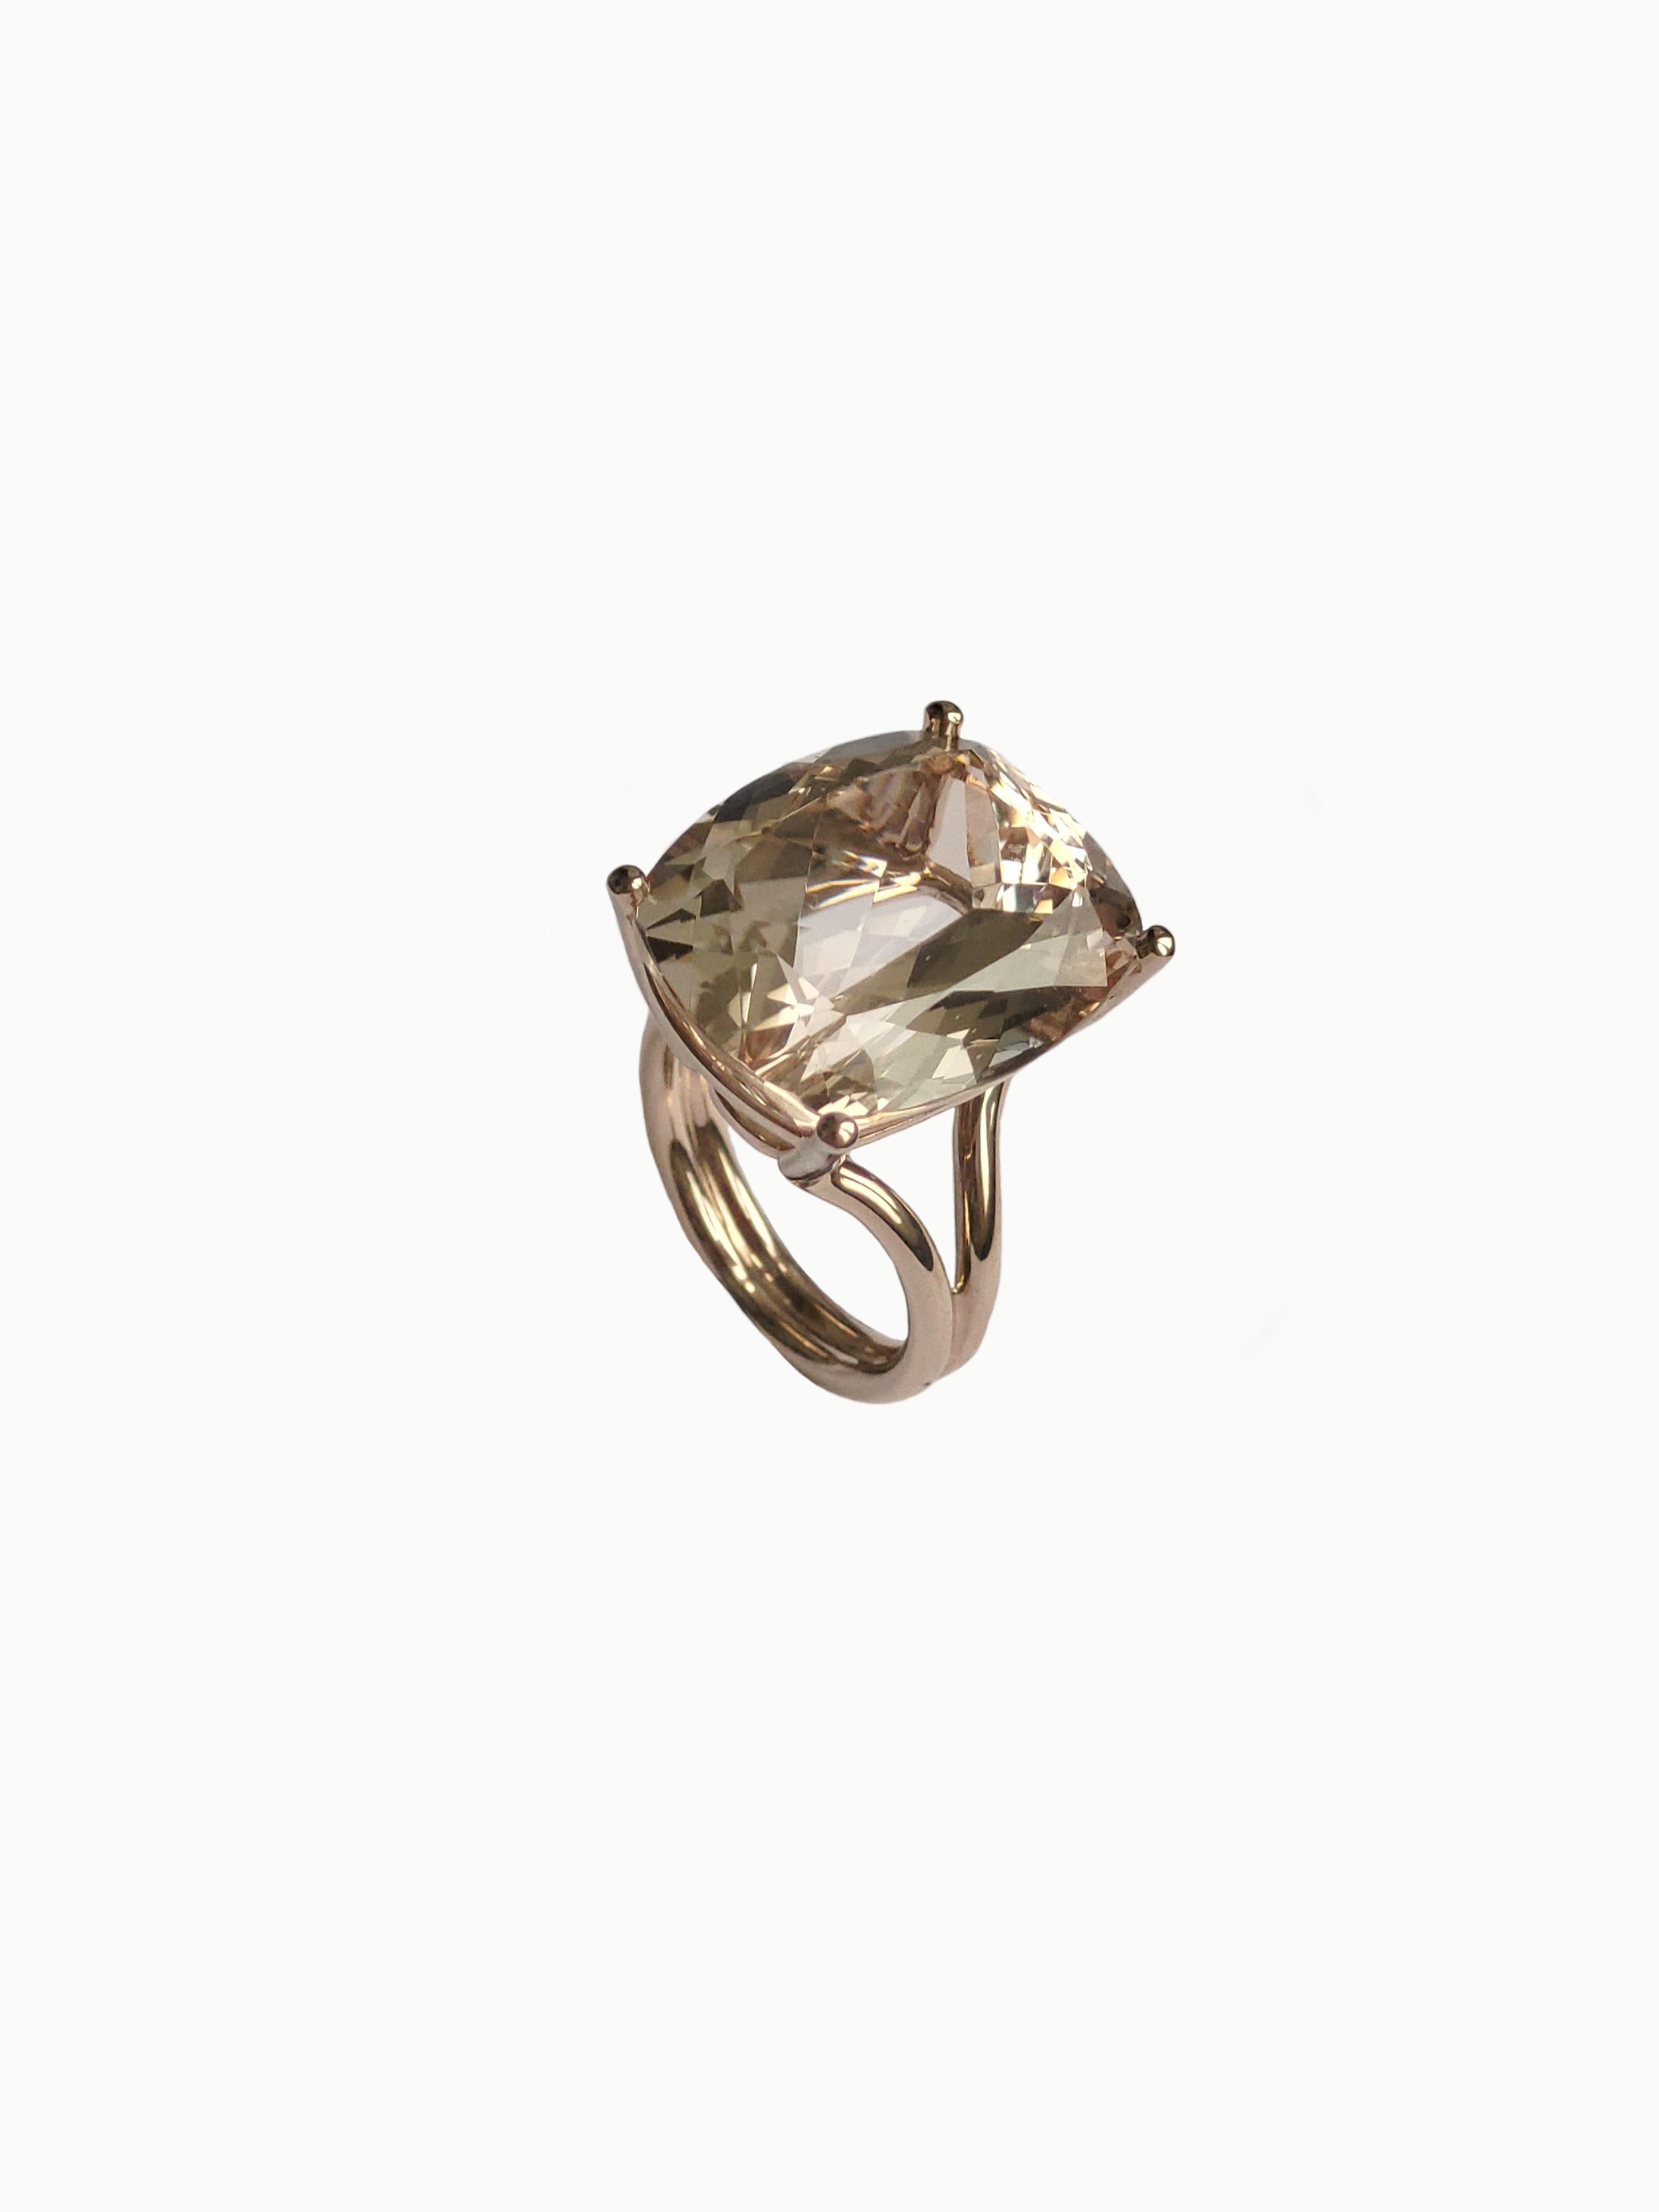 Delicate Ring made of 750/0 Gold and a stunning precious topaz of 33,57 carats / 20,5 x 17,5 mm - 8.07 x 6.89 inches.
Ring Size: European 53 / USA 6,5
This beautiful handcrafted ring with its most beautiful champagne colored precious topaz will